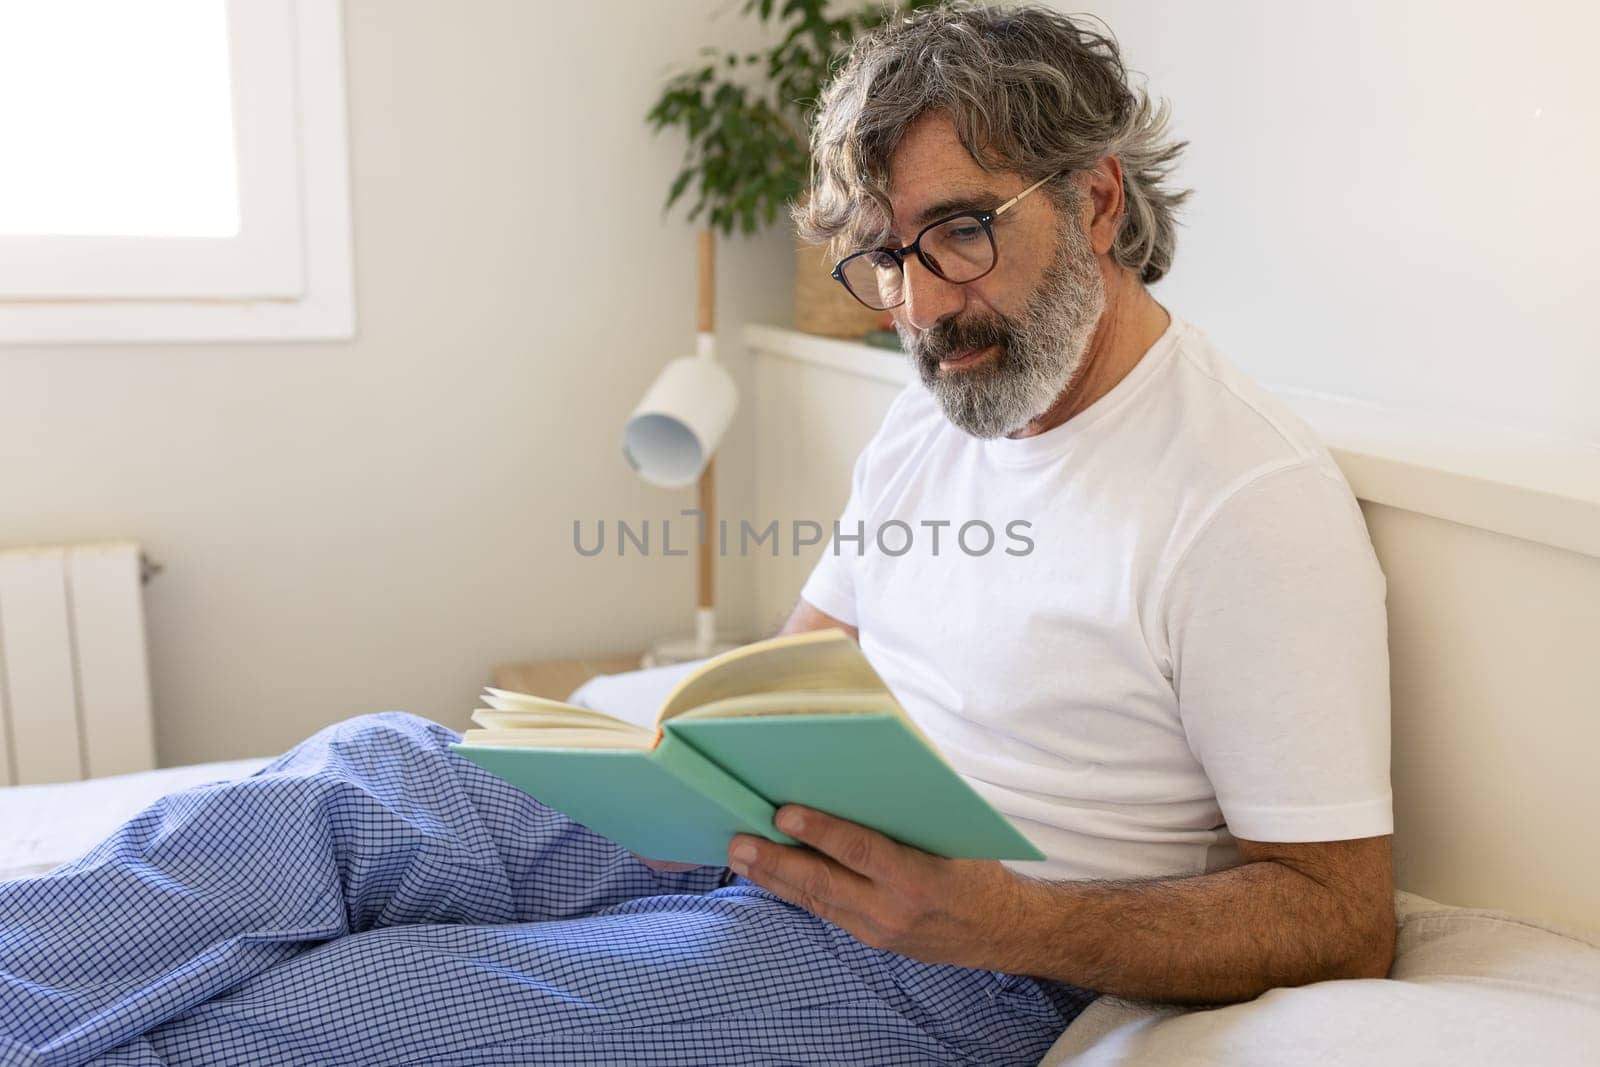 Mature man with glasses relaxing in bed, reading a book wearing pyjamas. Lifestyle concept.